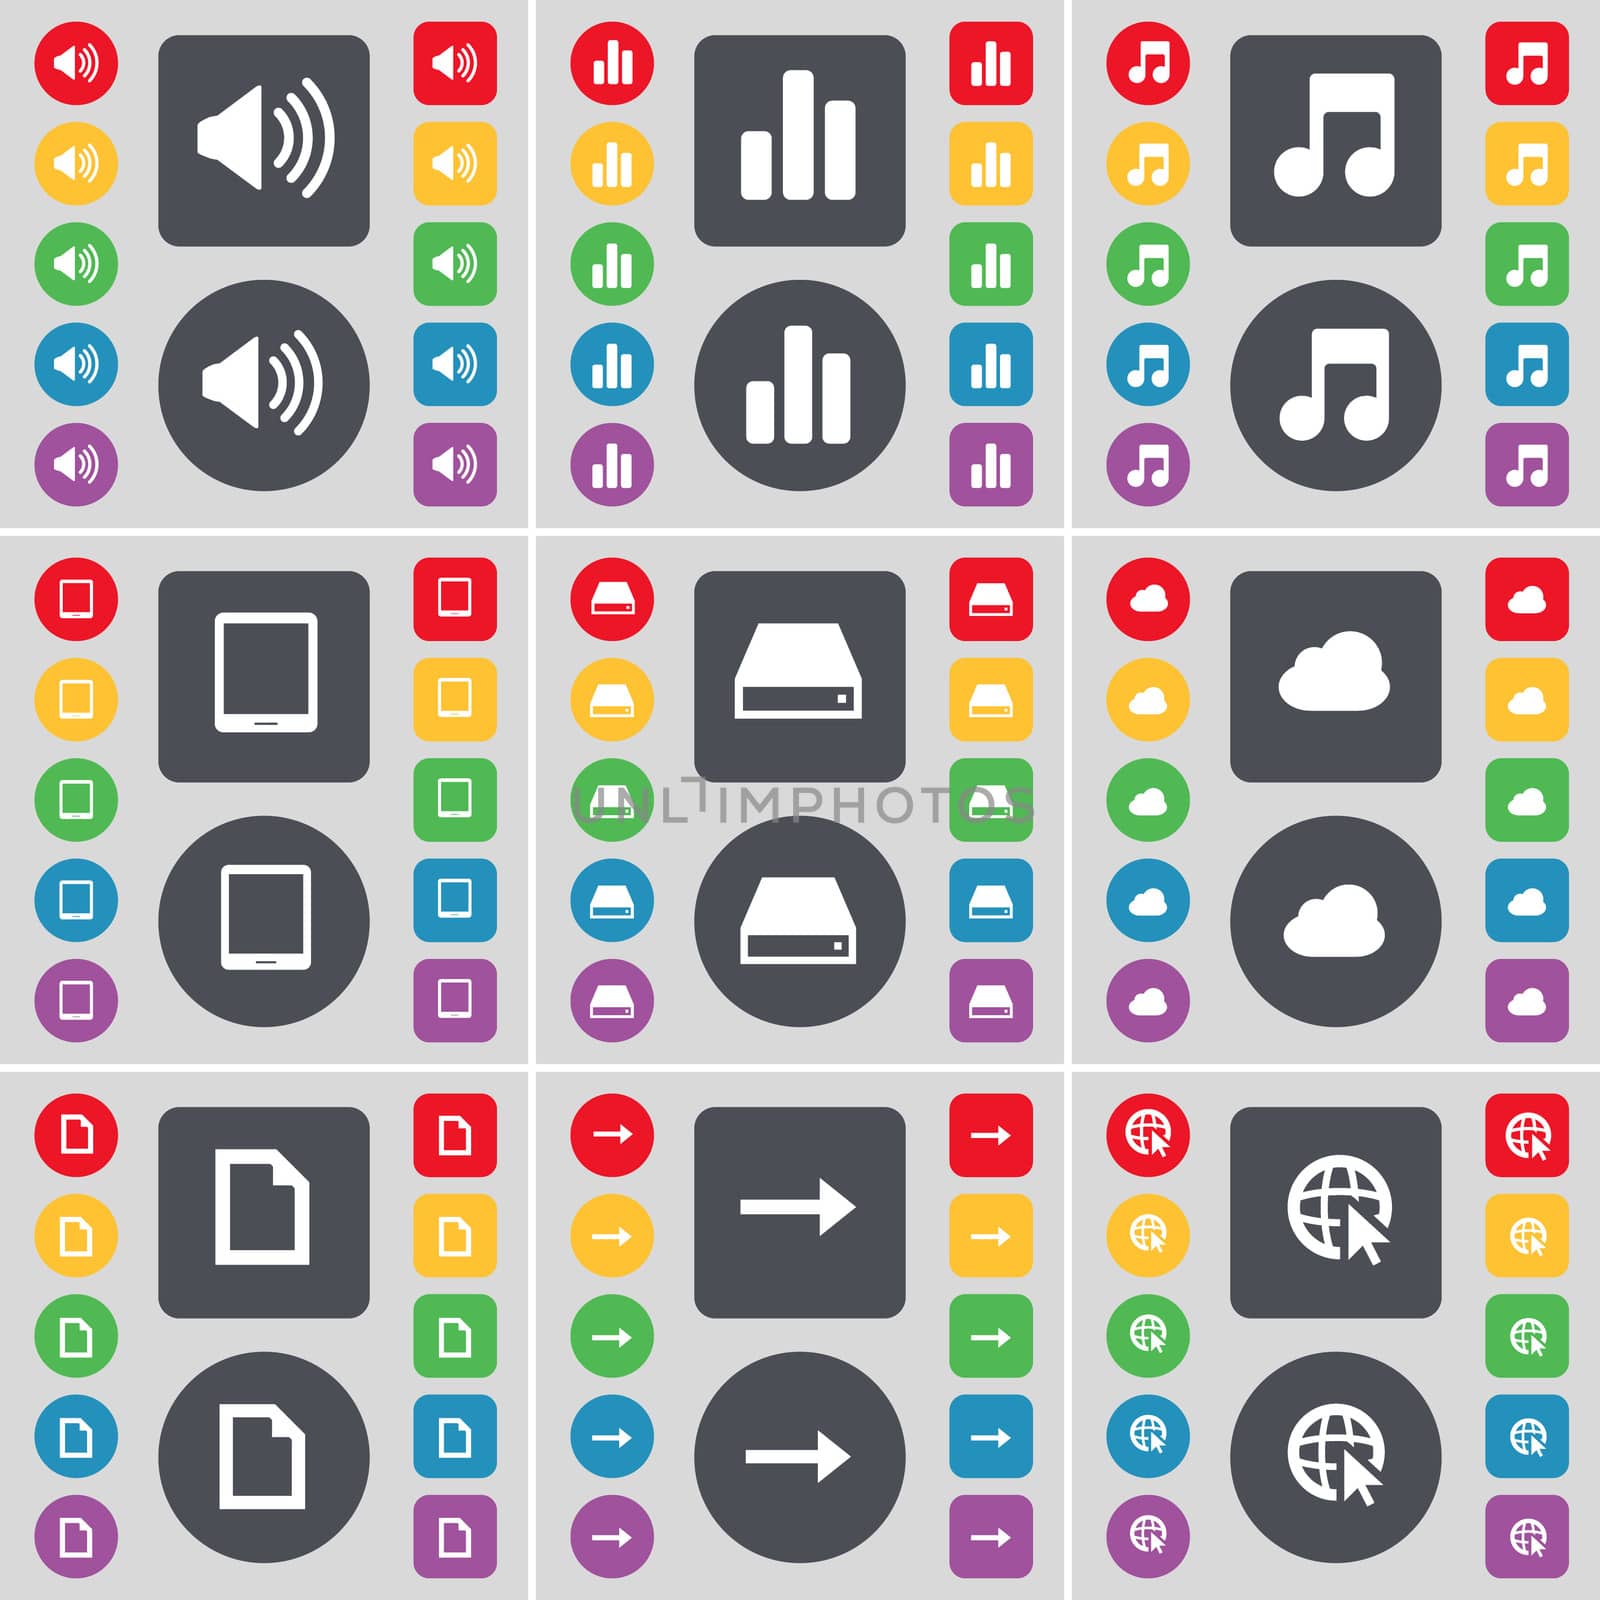 Sound, Diagram, Note, Tablet PC, Hard drive, Cloud, File, Arrow right, Web cursor icon symbol. A large set of flat, colored buttons for your design.  by serhii_lohvyniuk